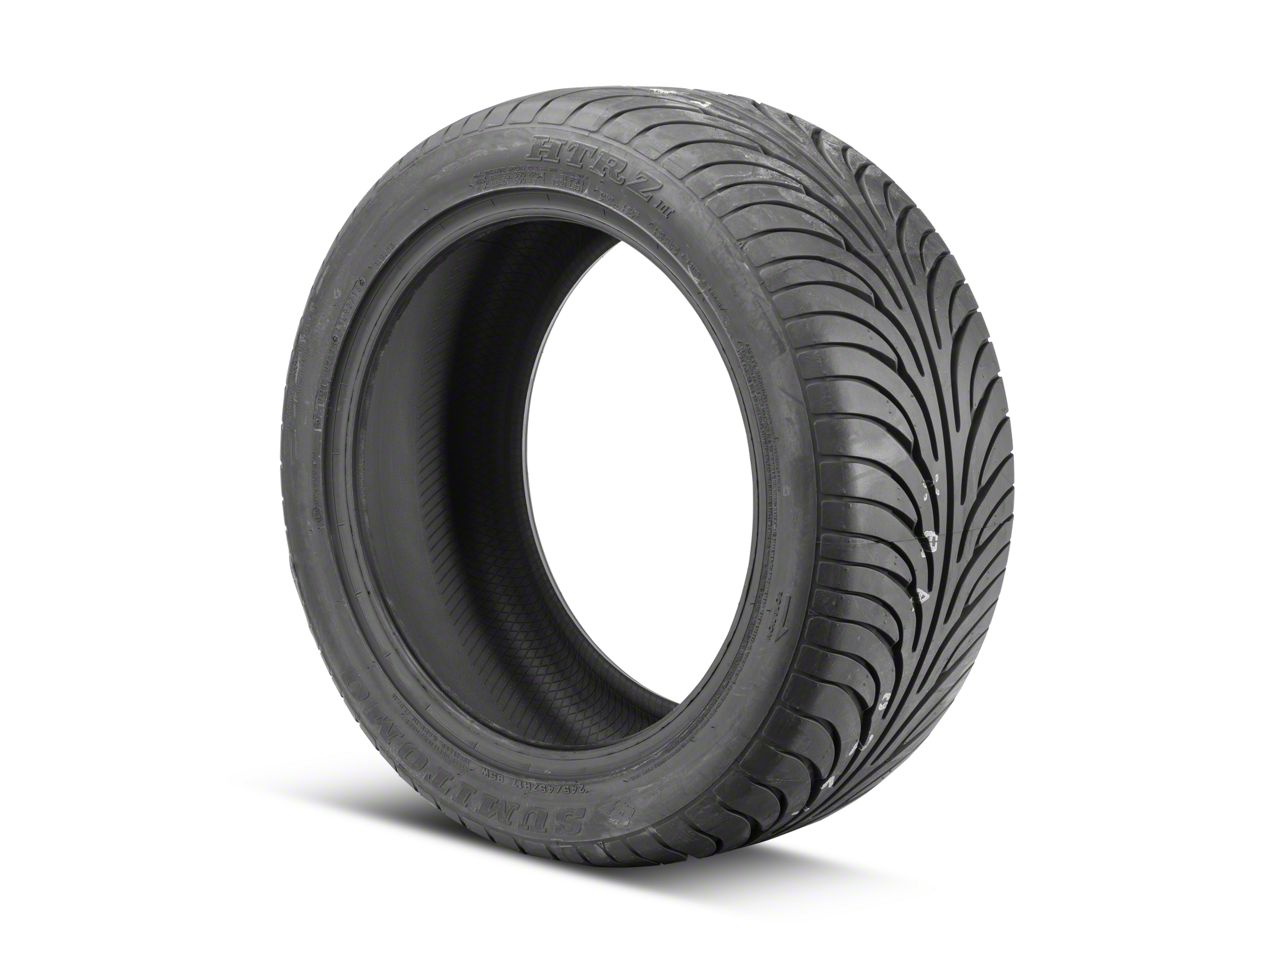 Sumitomo Mustang High Performance HTR Z II Tire 397491 - Free Shipping